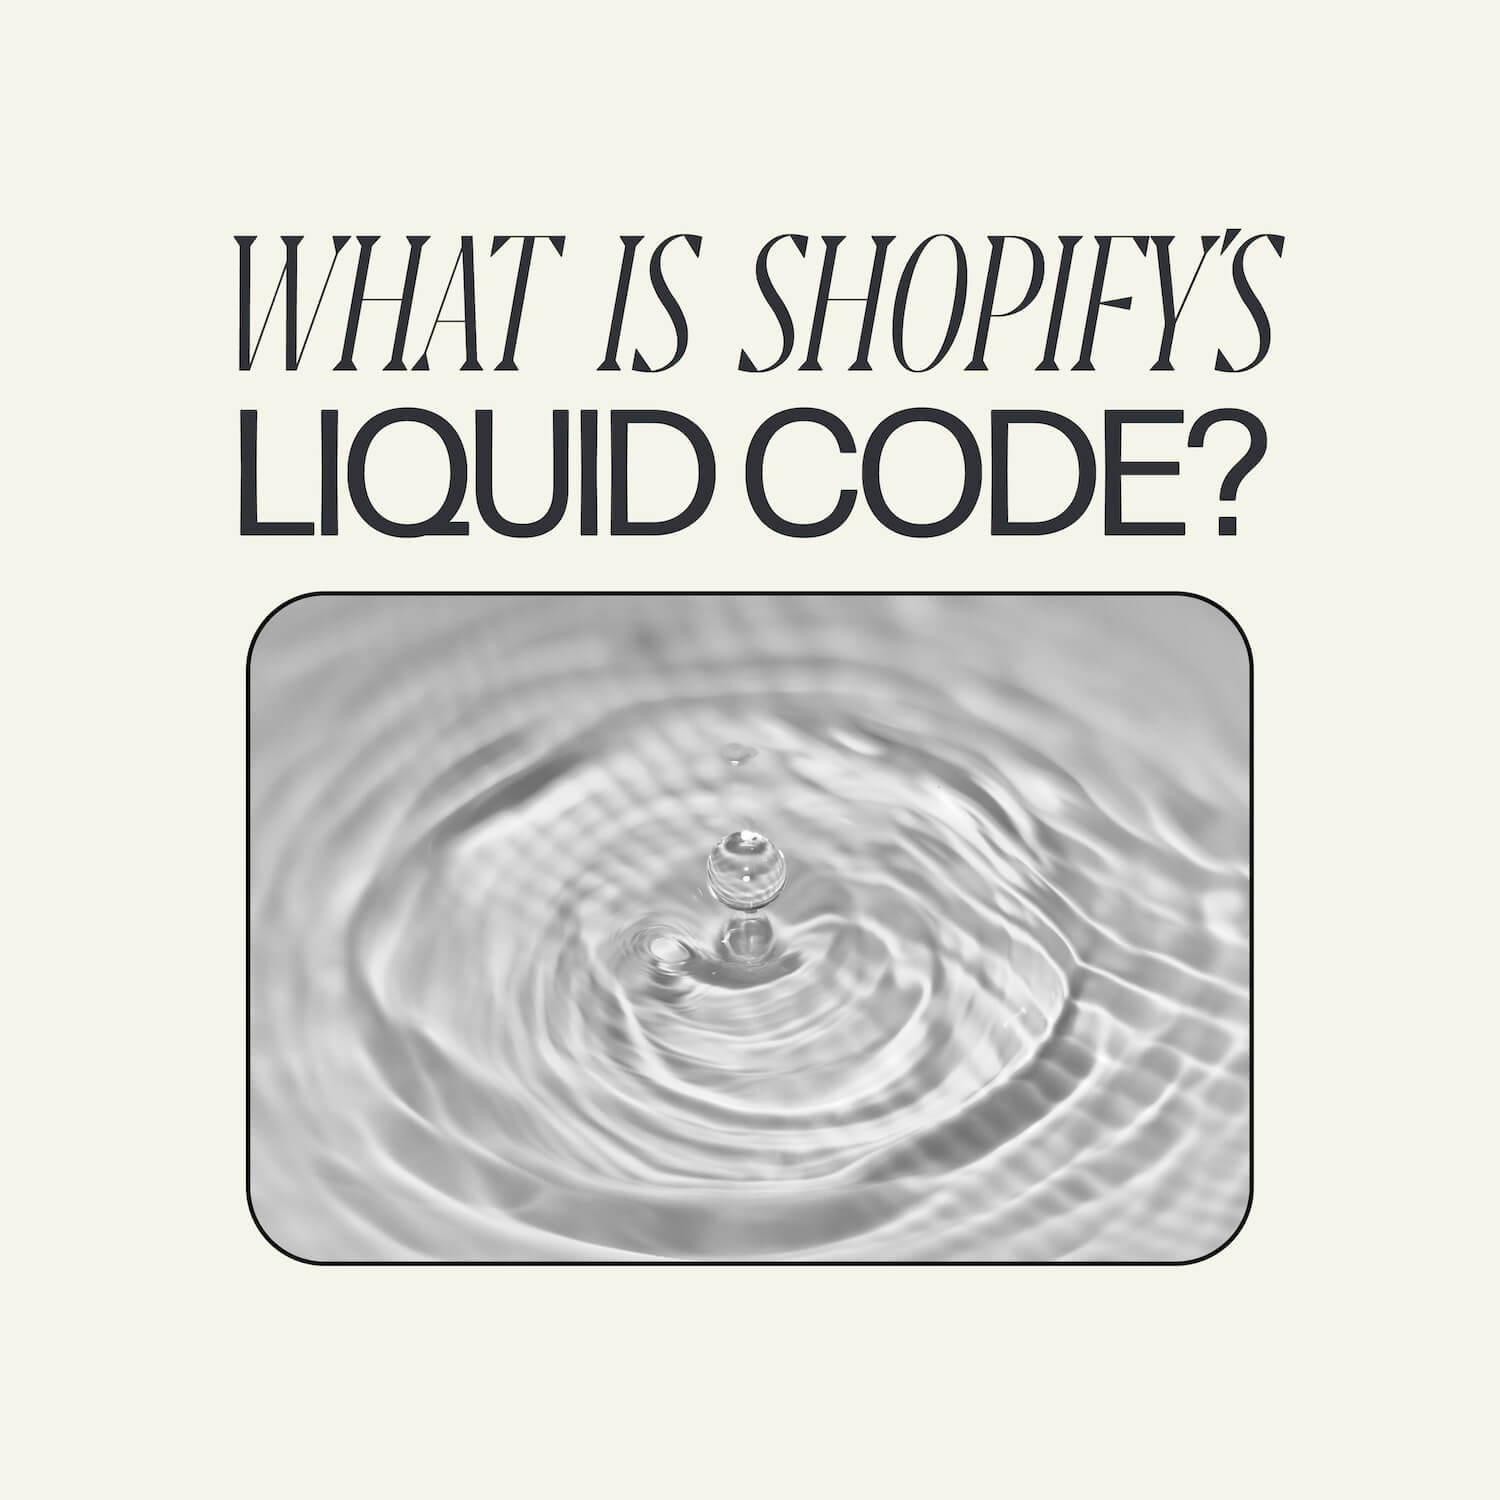 What is Shopify's Liquid Code?